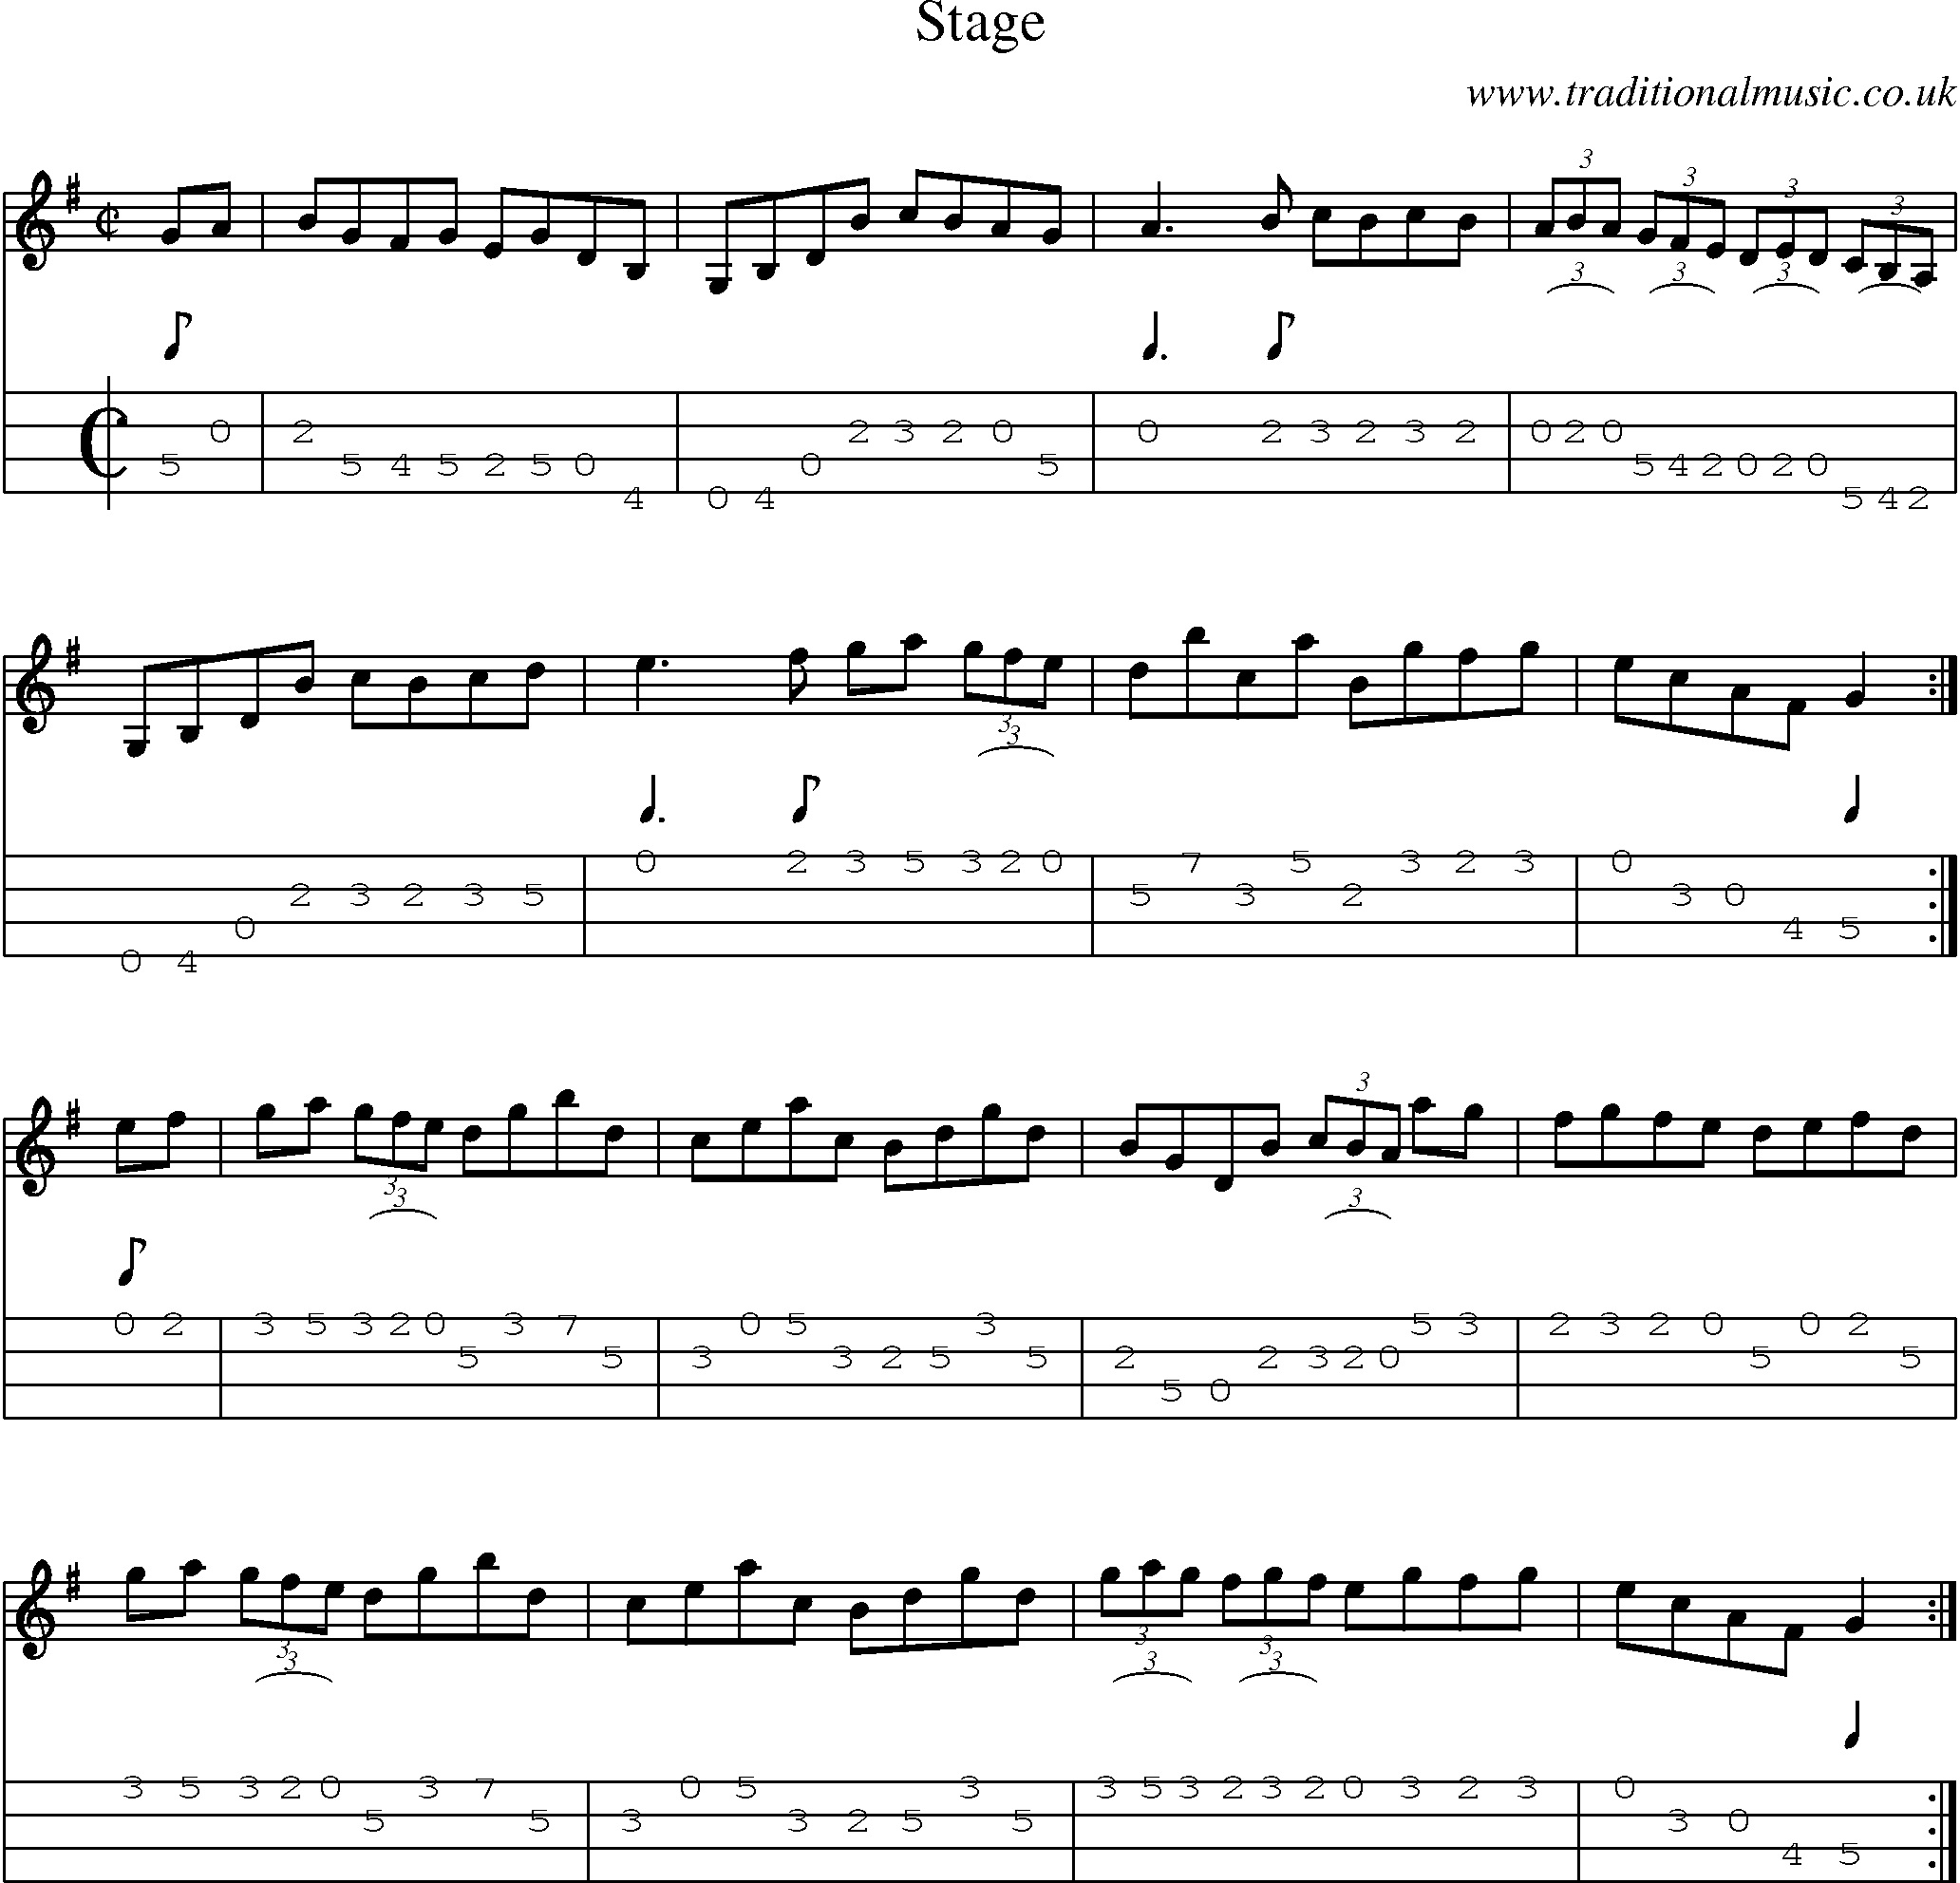 Music Score and Mandolin Tabs for Stage